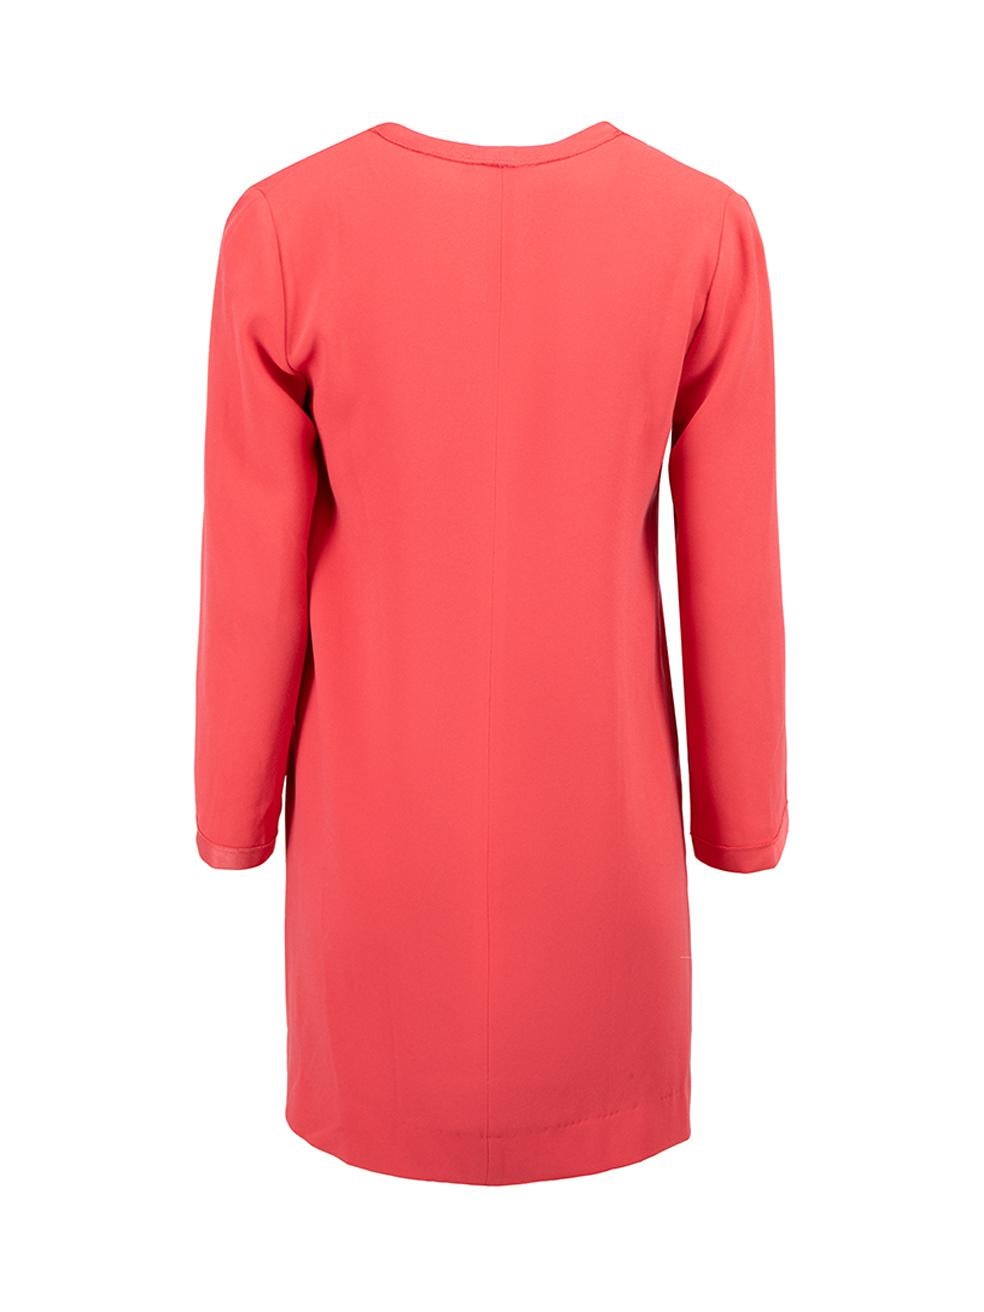 Coral V-Neck Tunic Top Size M In Good Condition For Sale In London, GB